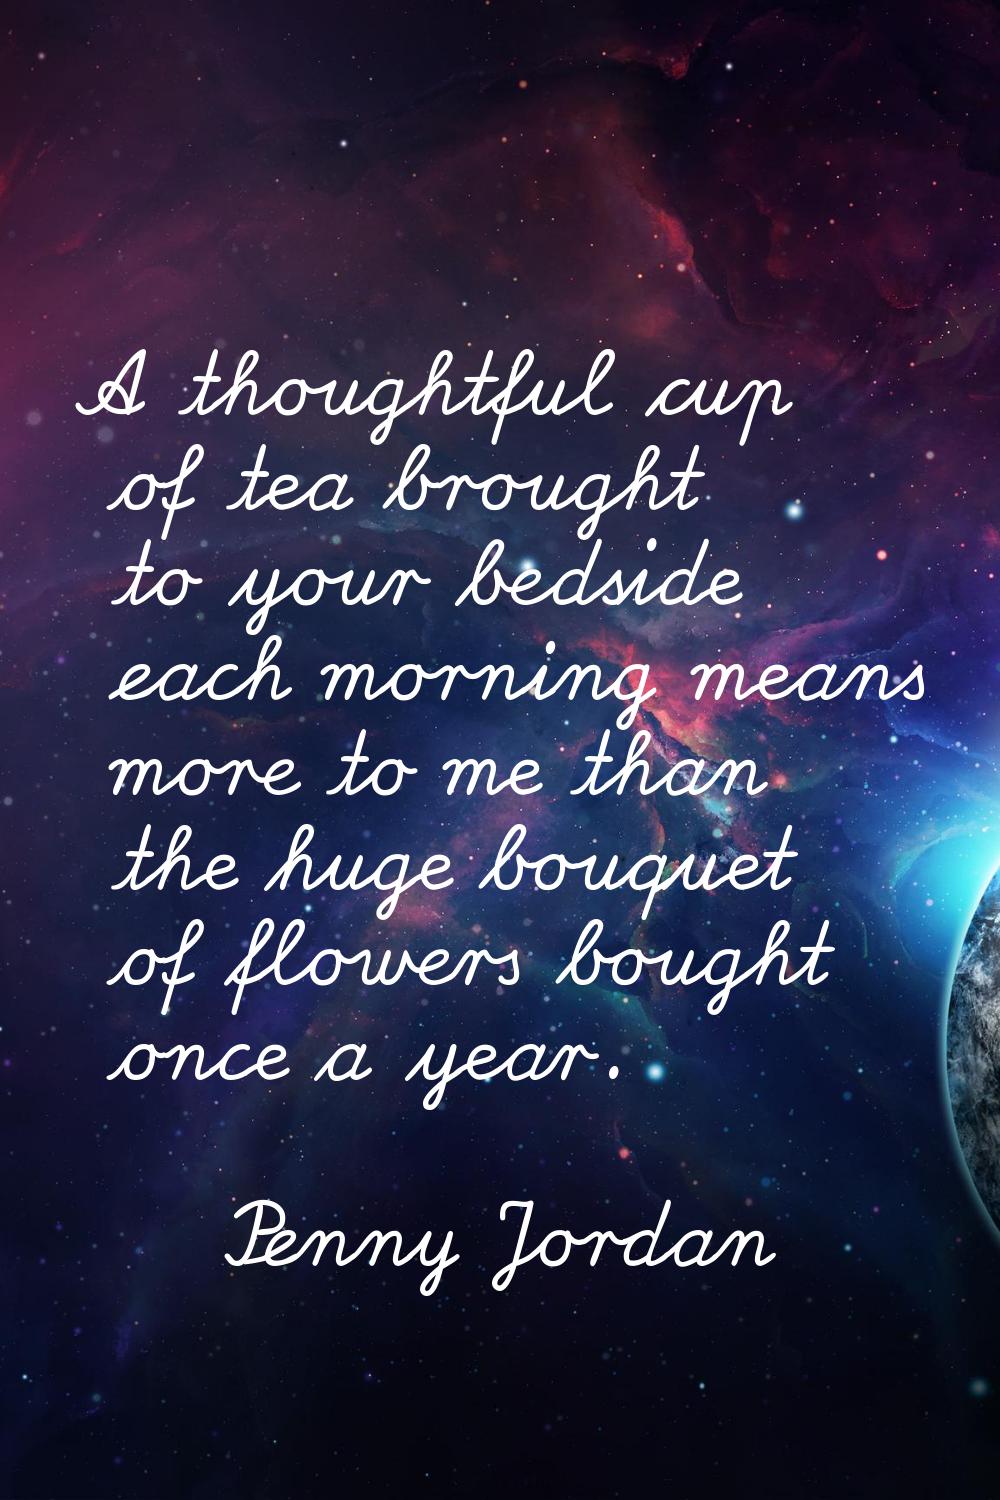 A thoughtful cup of tea brought to your bedside each morning means more to me than the huge bouquet